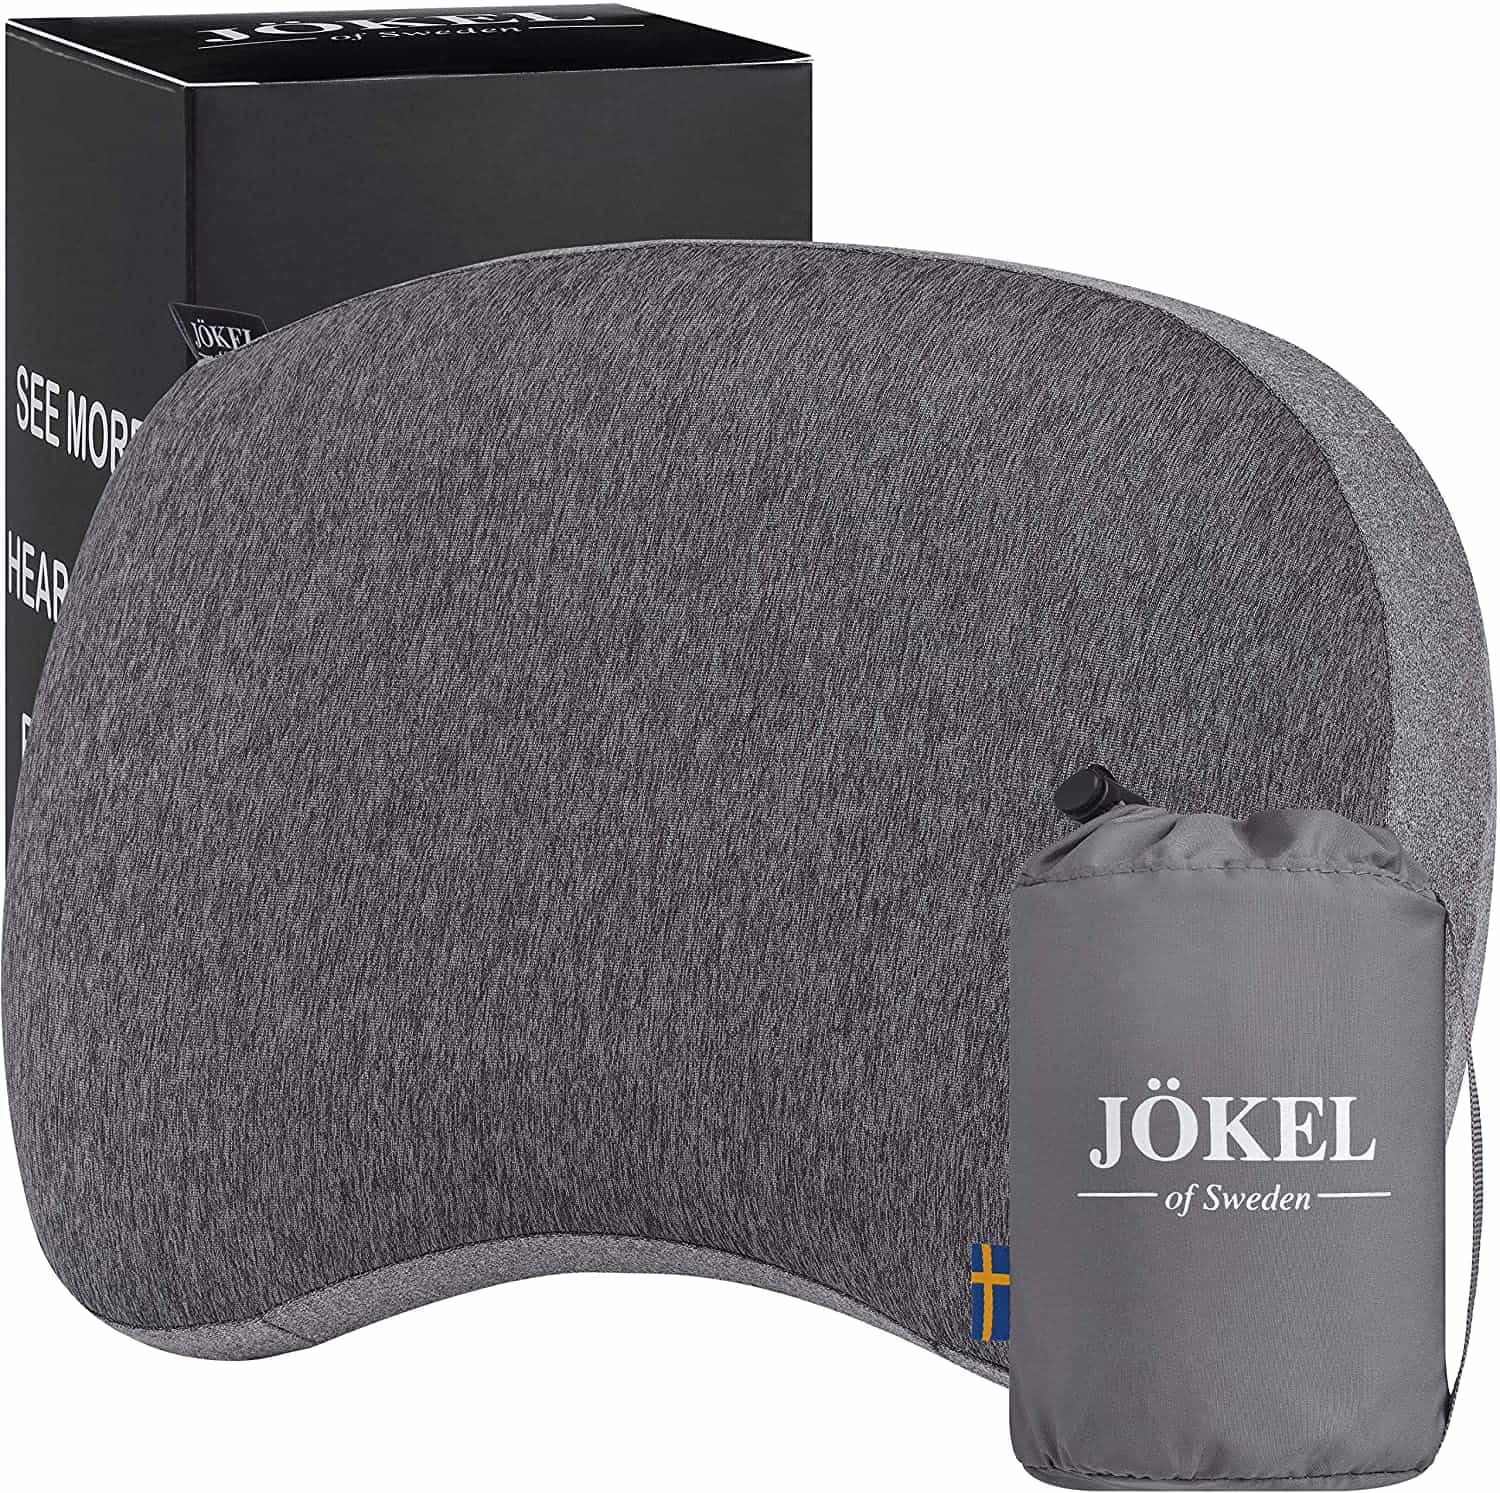 JÖKEL Inflatable Pillow, Travel Camping Pillow with Head, Neck & Back Support